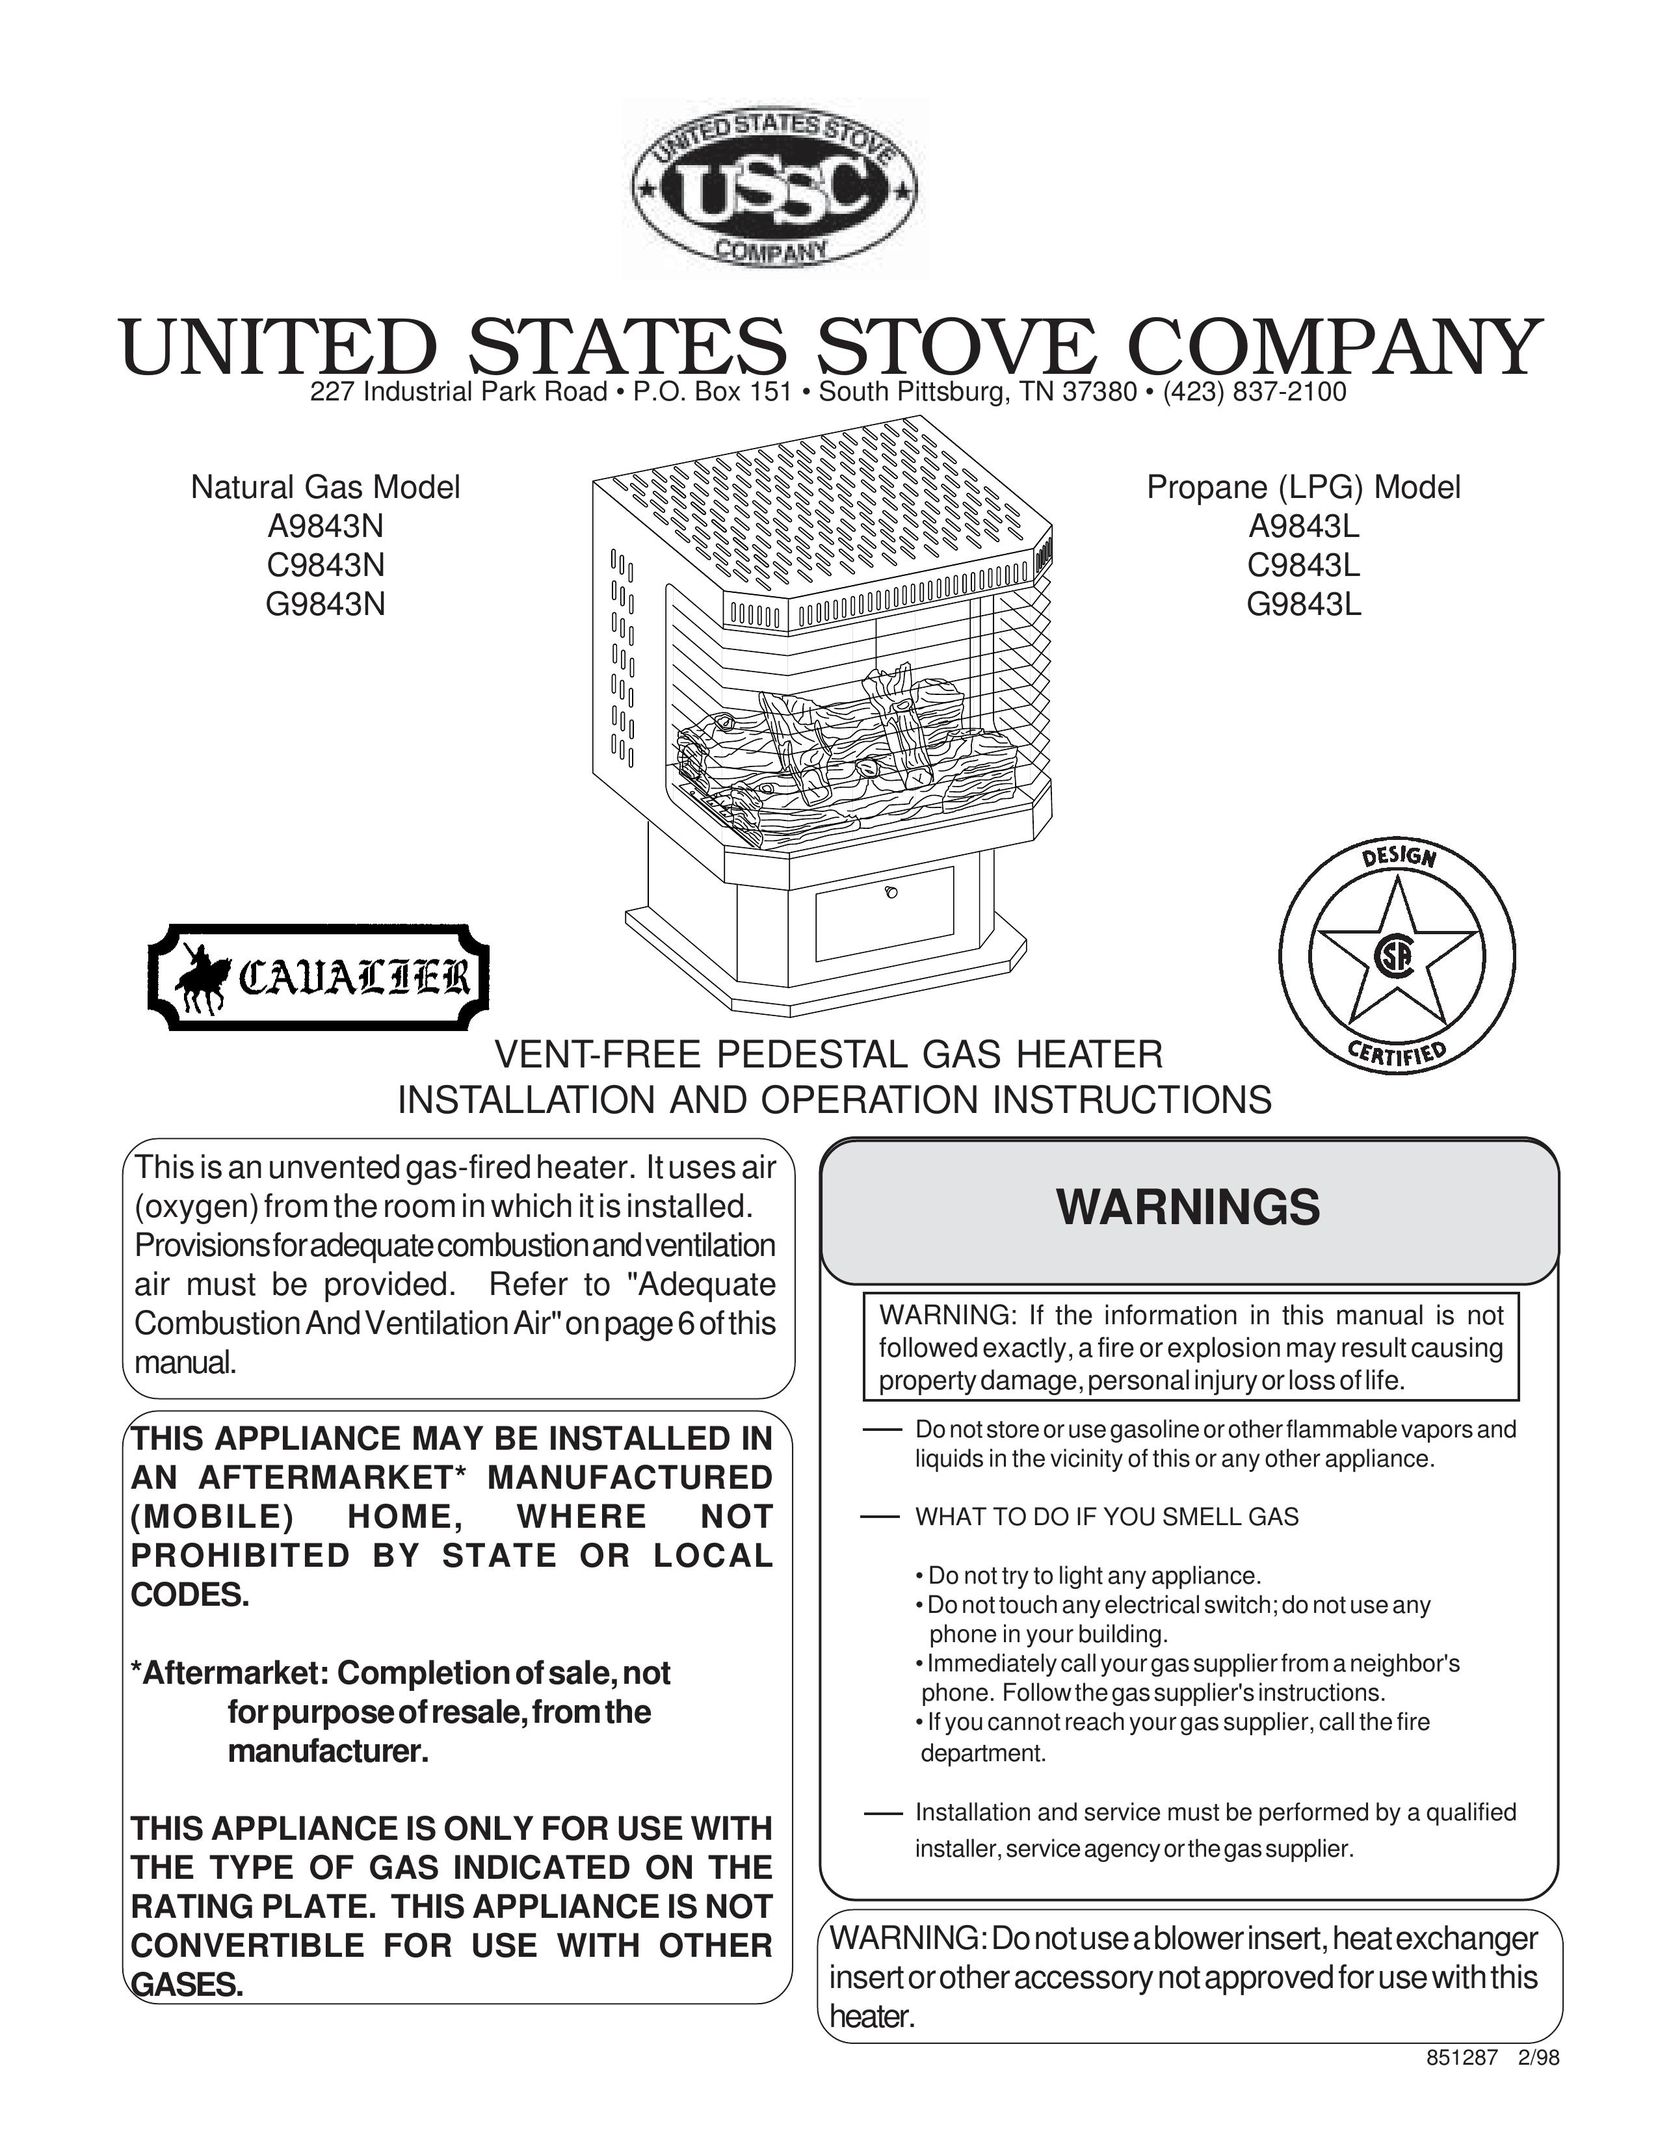 United States Stove C9843L Gas Heater User Manual